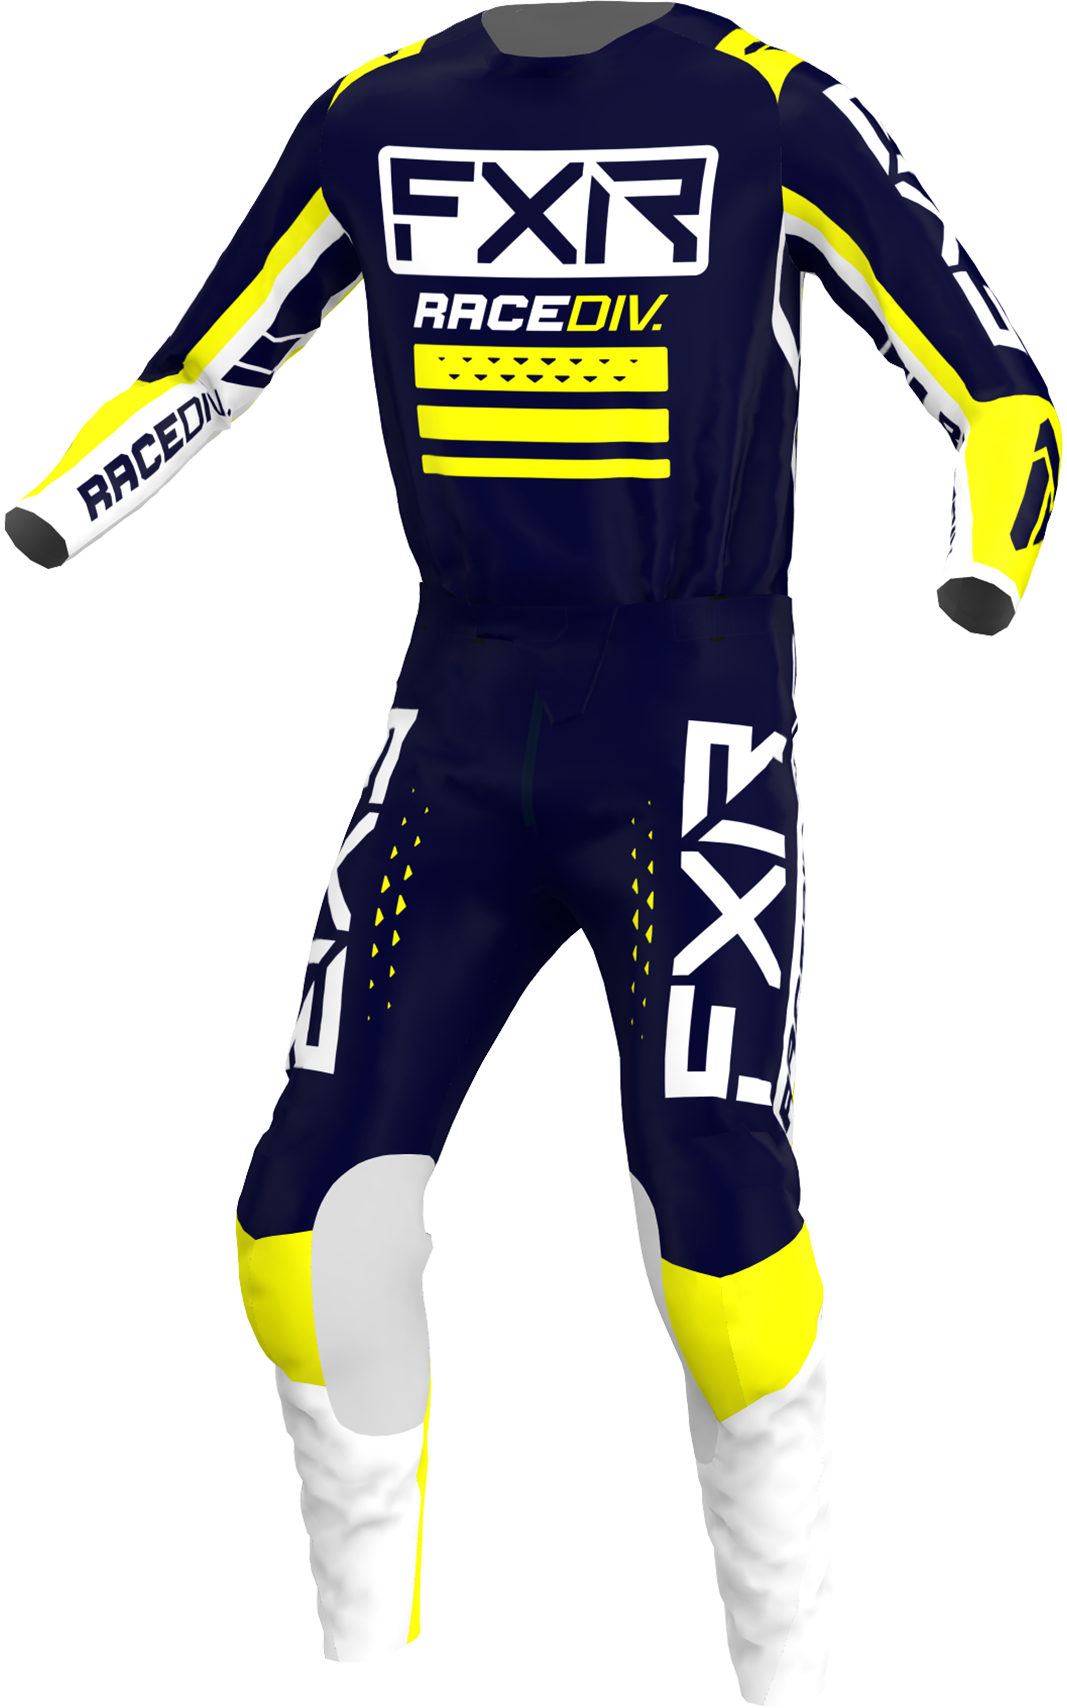 A 3D image of FXR’s Clutch Pro MX Jersey and Pant 22 in Midnight / White / Yellow colorway